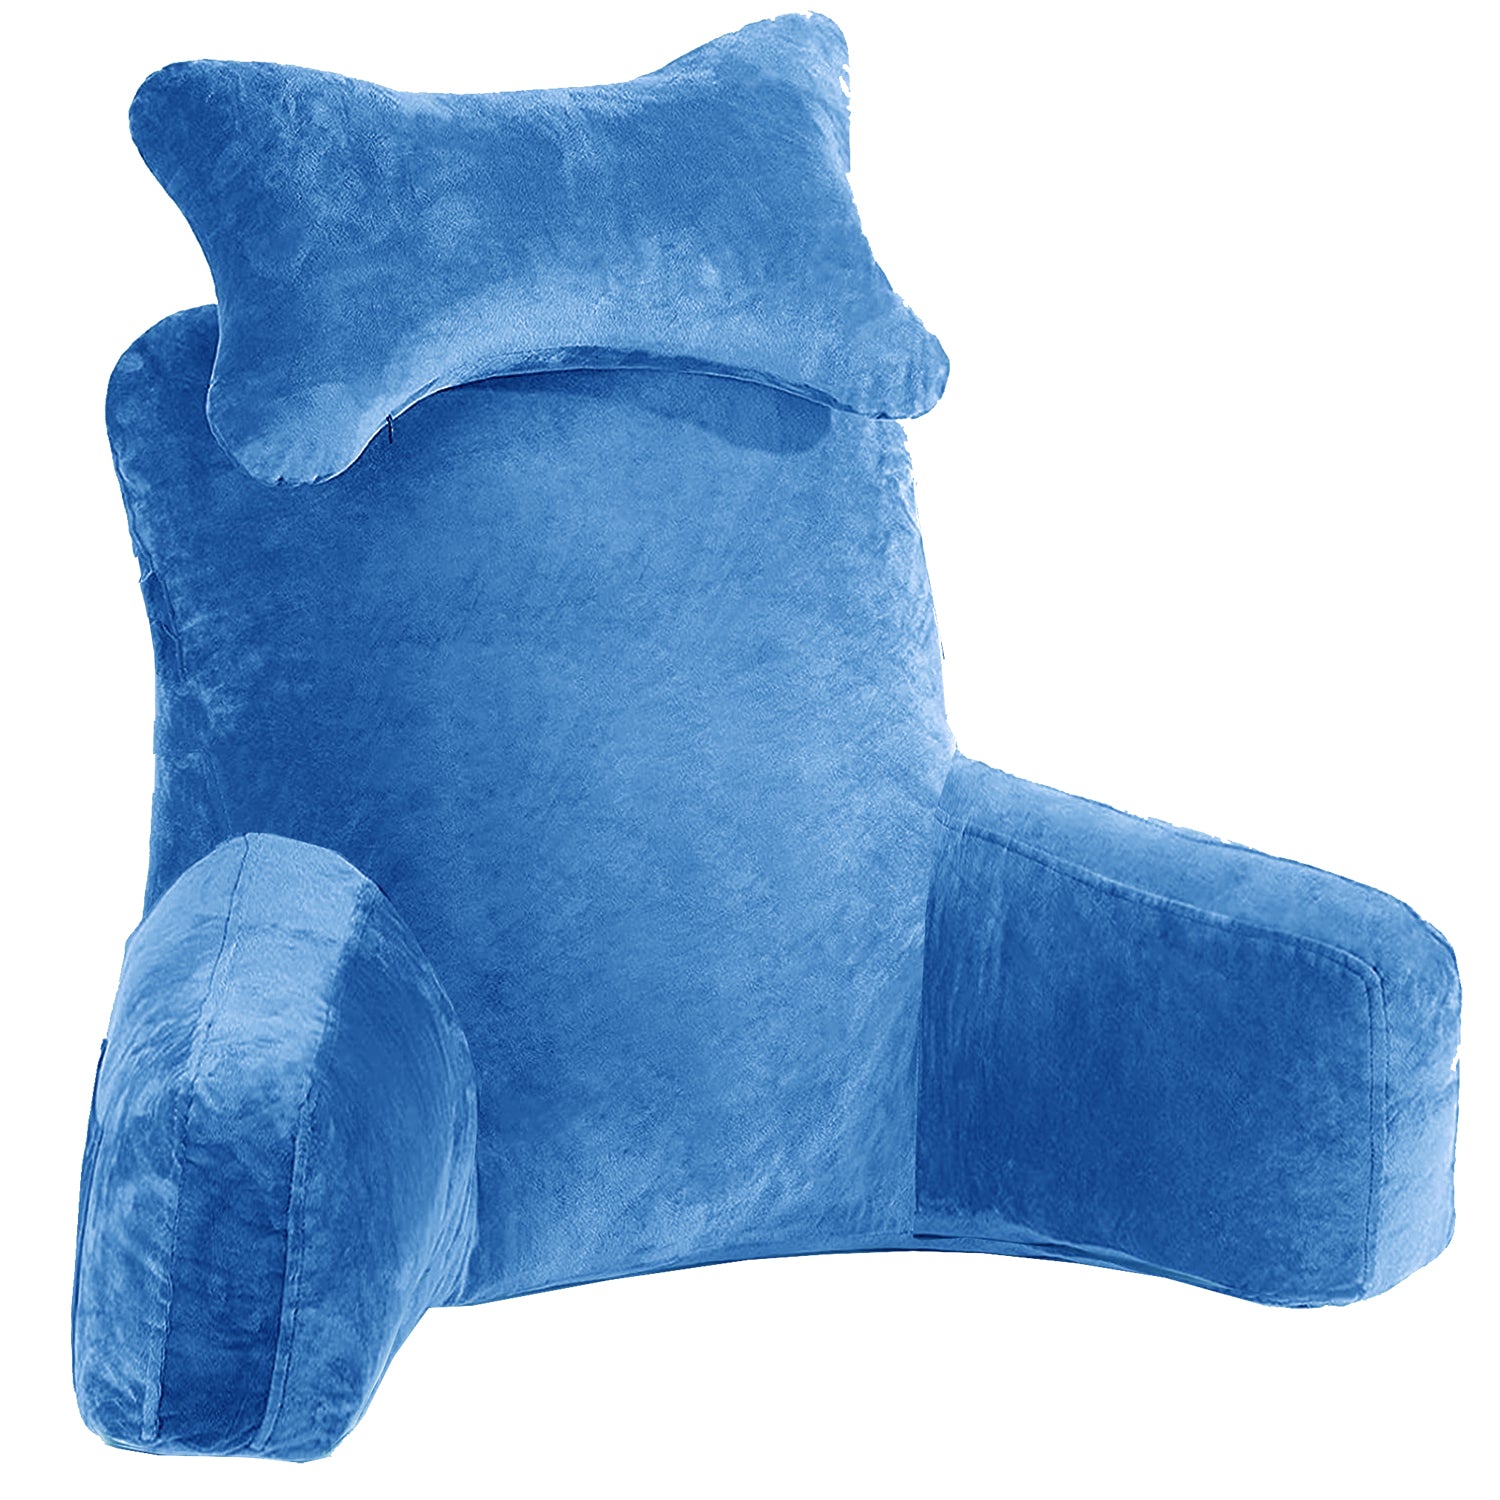 Backrest Pillow with ButterFly Neck Pillow | High Armrest - Turquoise